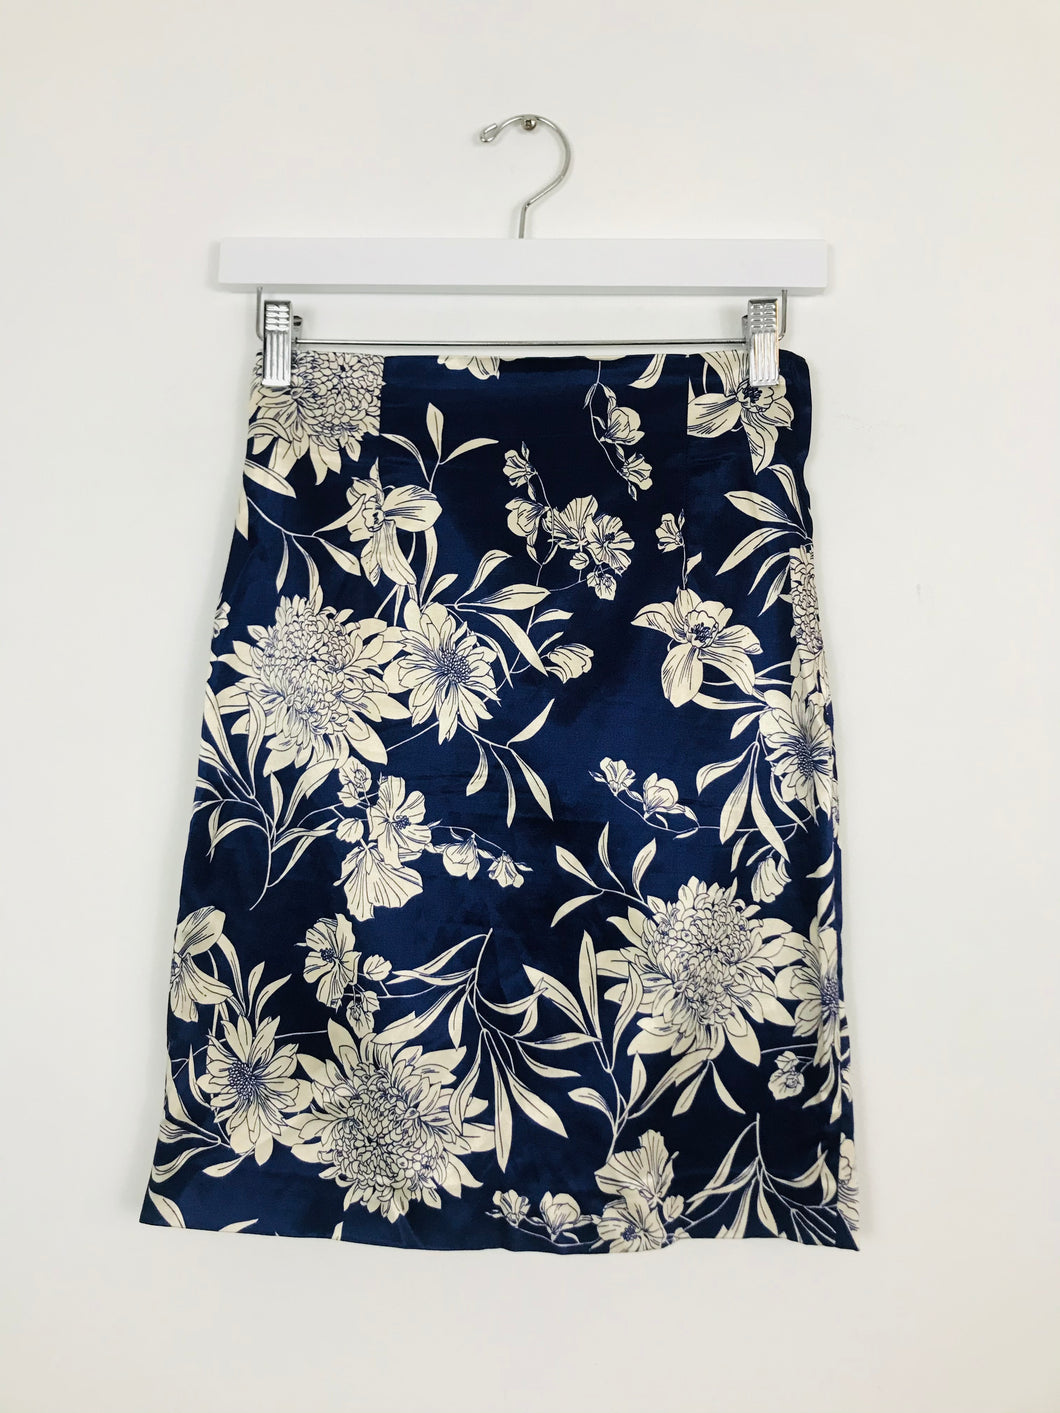 Zara Womens Floral High Waisted Pencil Skirt | UK 8 | Blue and white